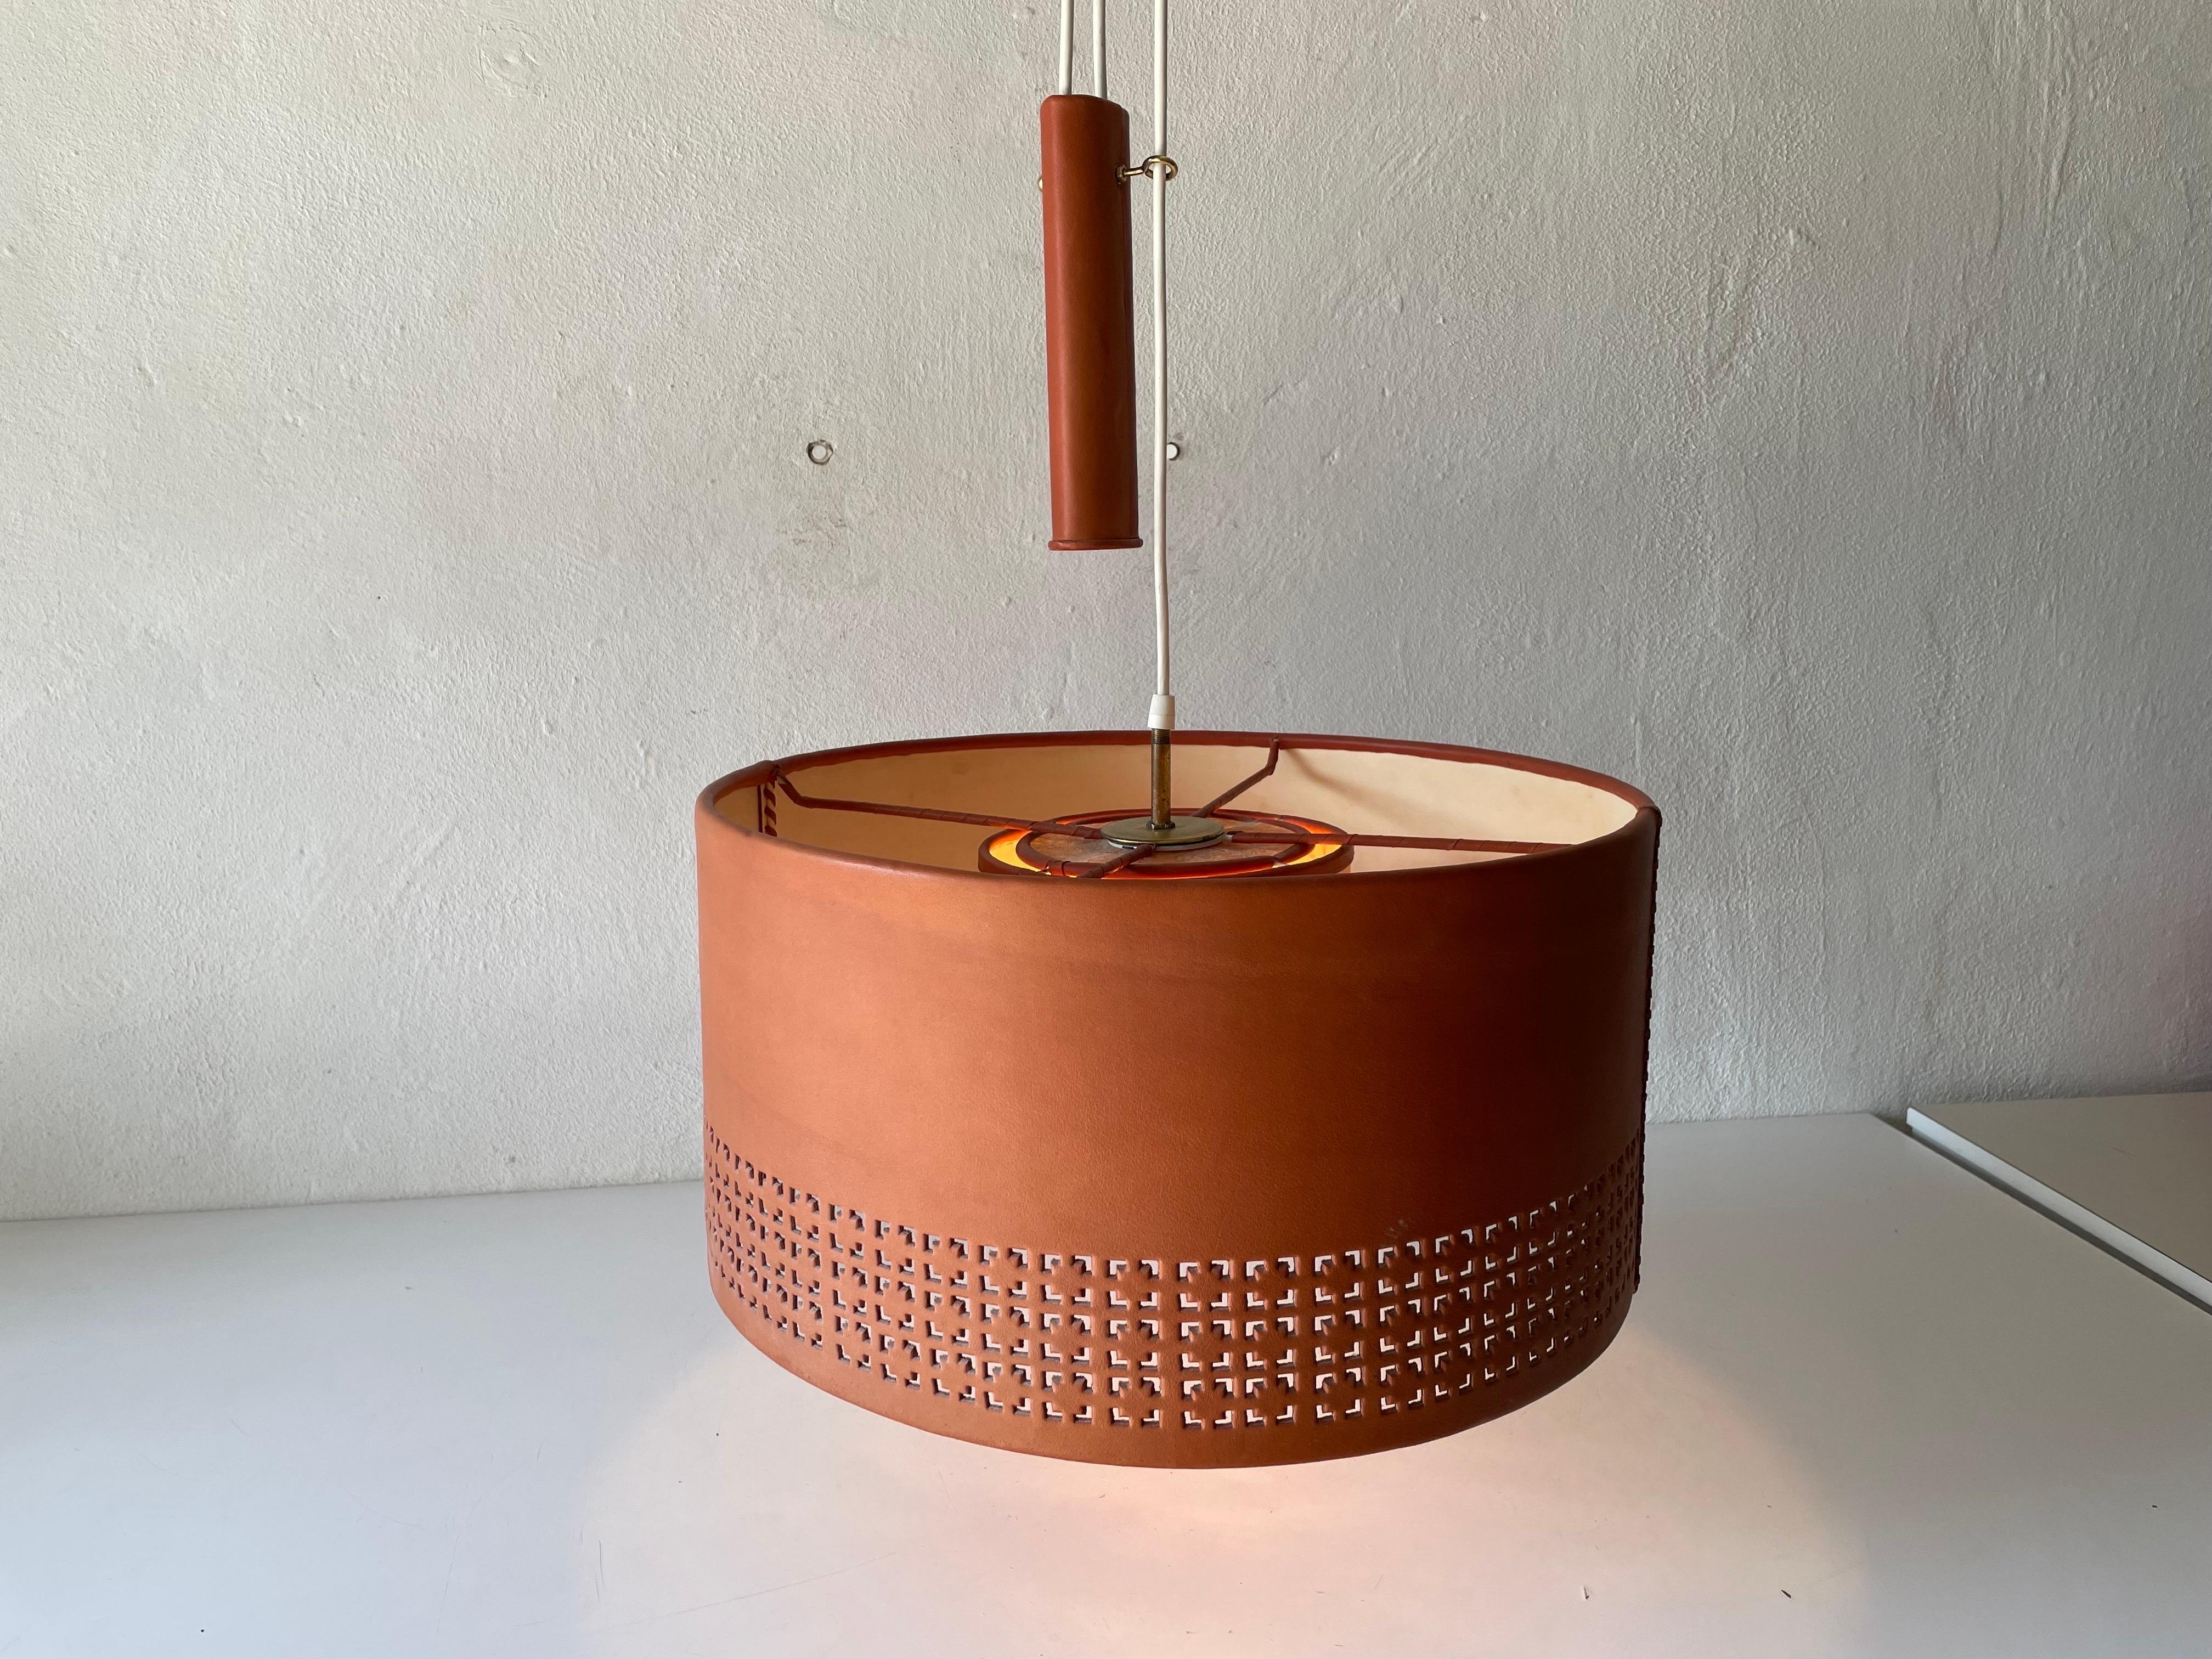 Cylindrical Leather Shade with Motifs Counterweight Pendant Lamp, 1960s, Germany For Sale 9